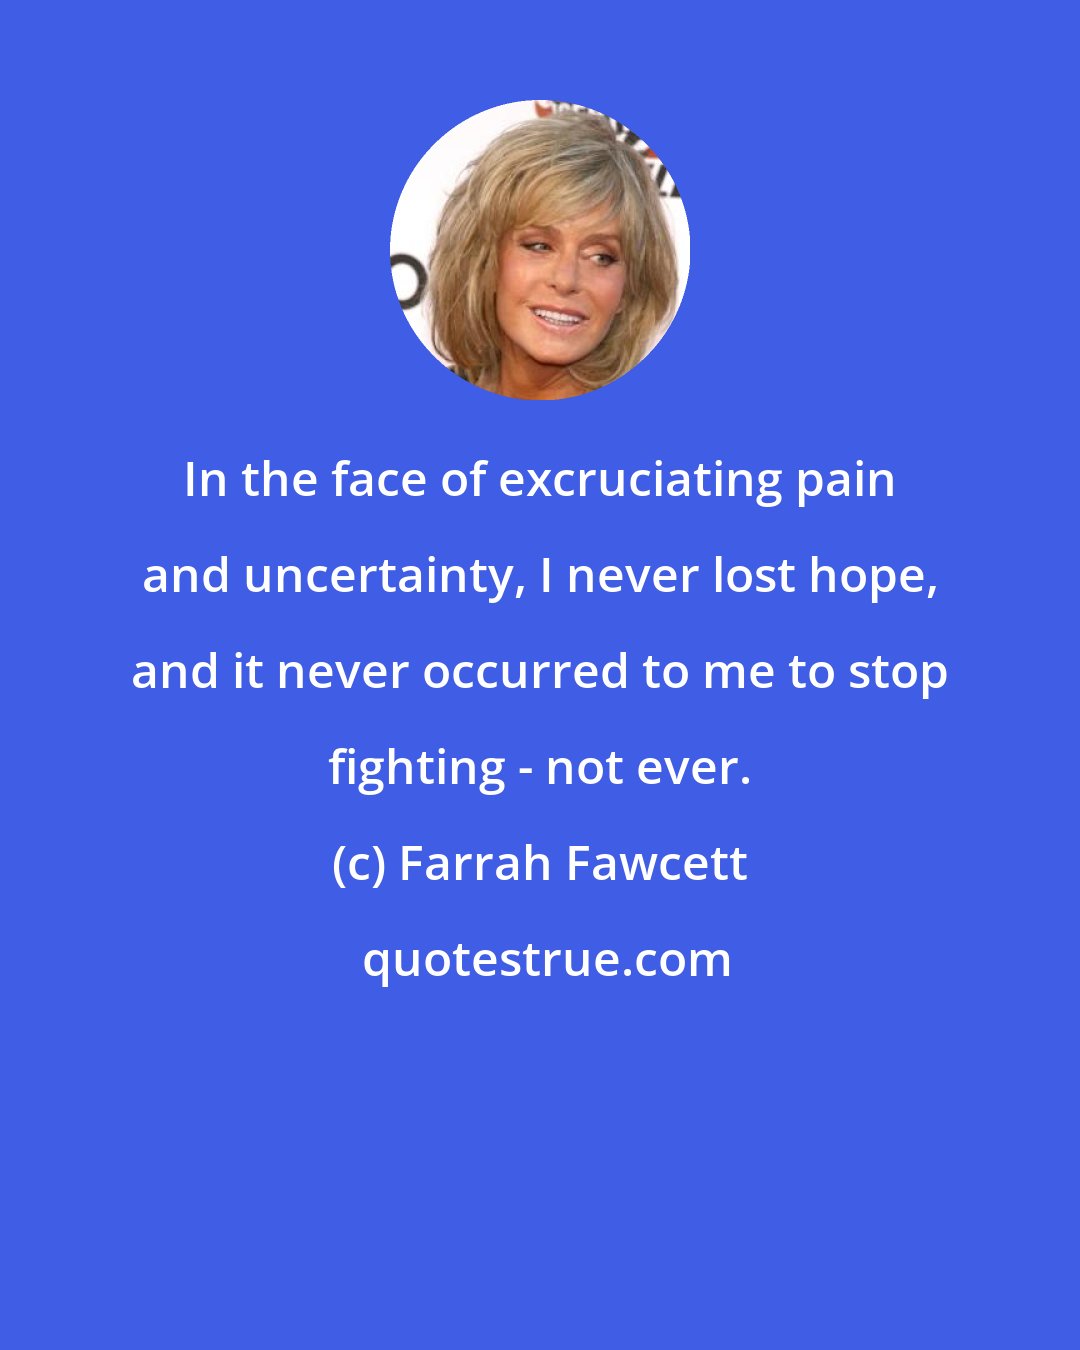 Farrah Fawcett: In the face of excruciating pain and uncertainty, I never lost hope, and it never occurred to me to stop fighting - not ever.